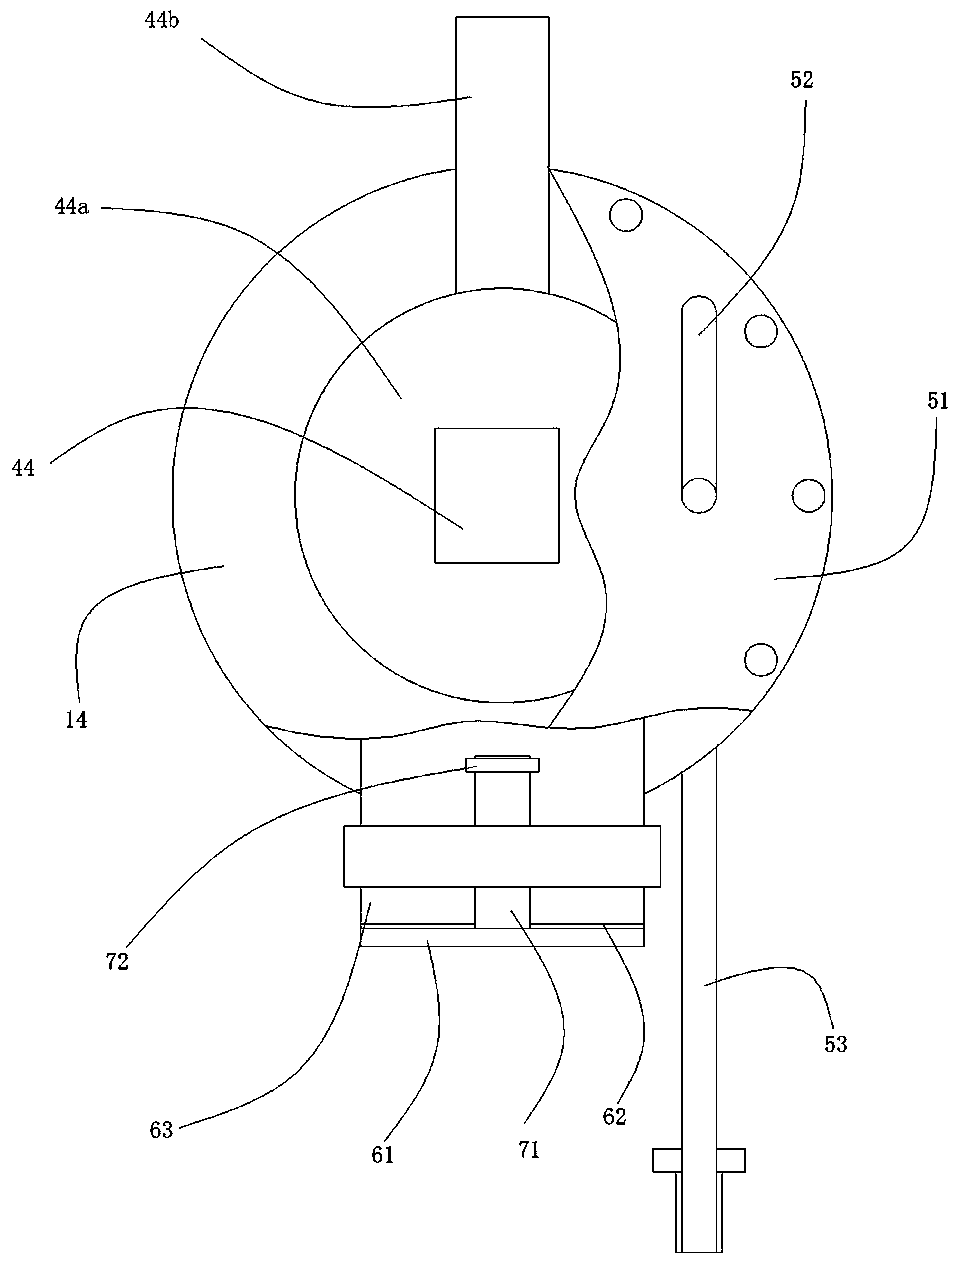 Faucet facilitating self-cleaning of inner cavity